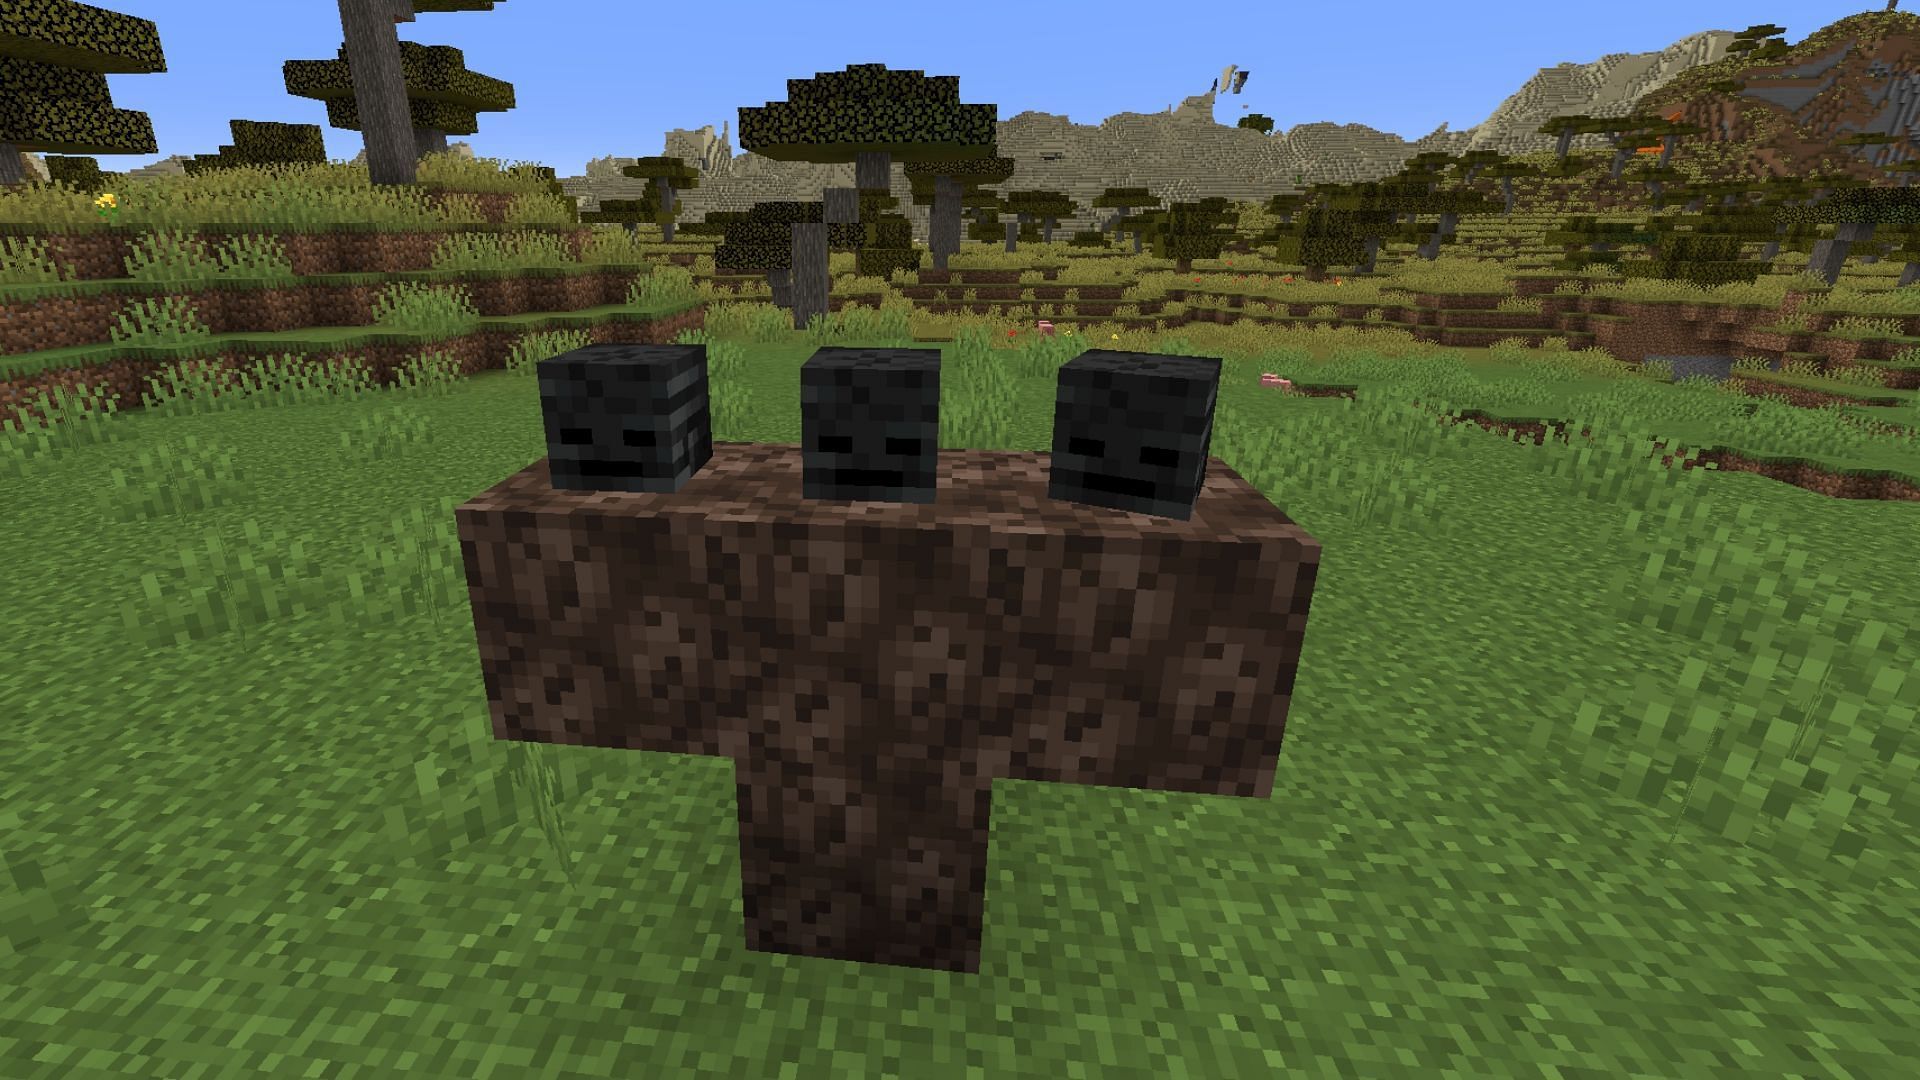 Configuration to summon the Wither boss mob in Minecraft (Image via IGN)